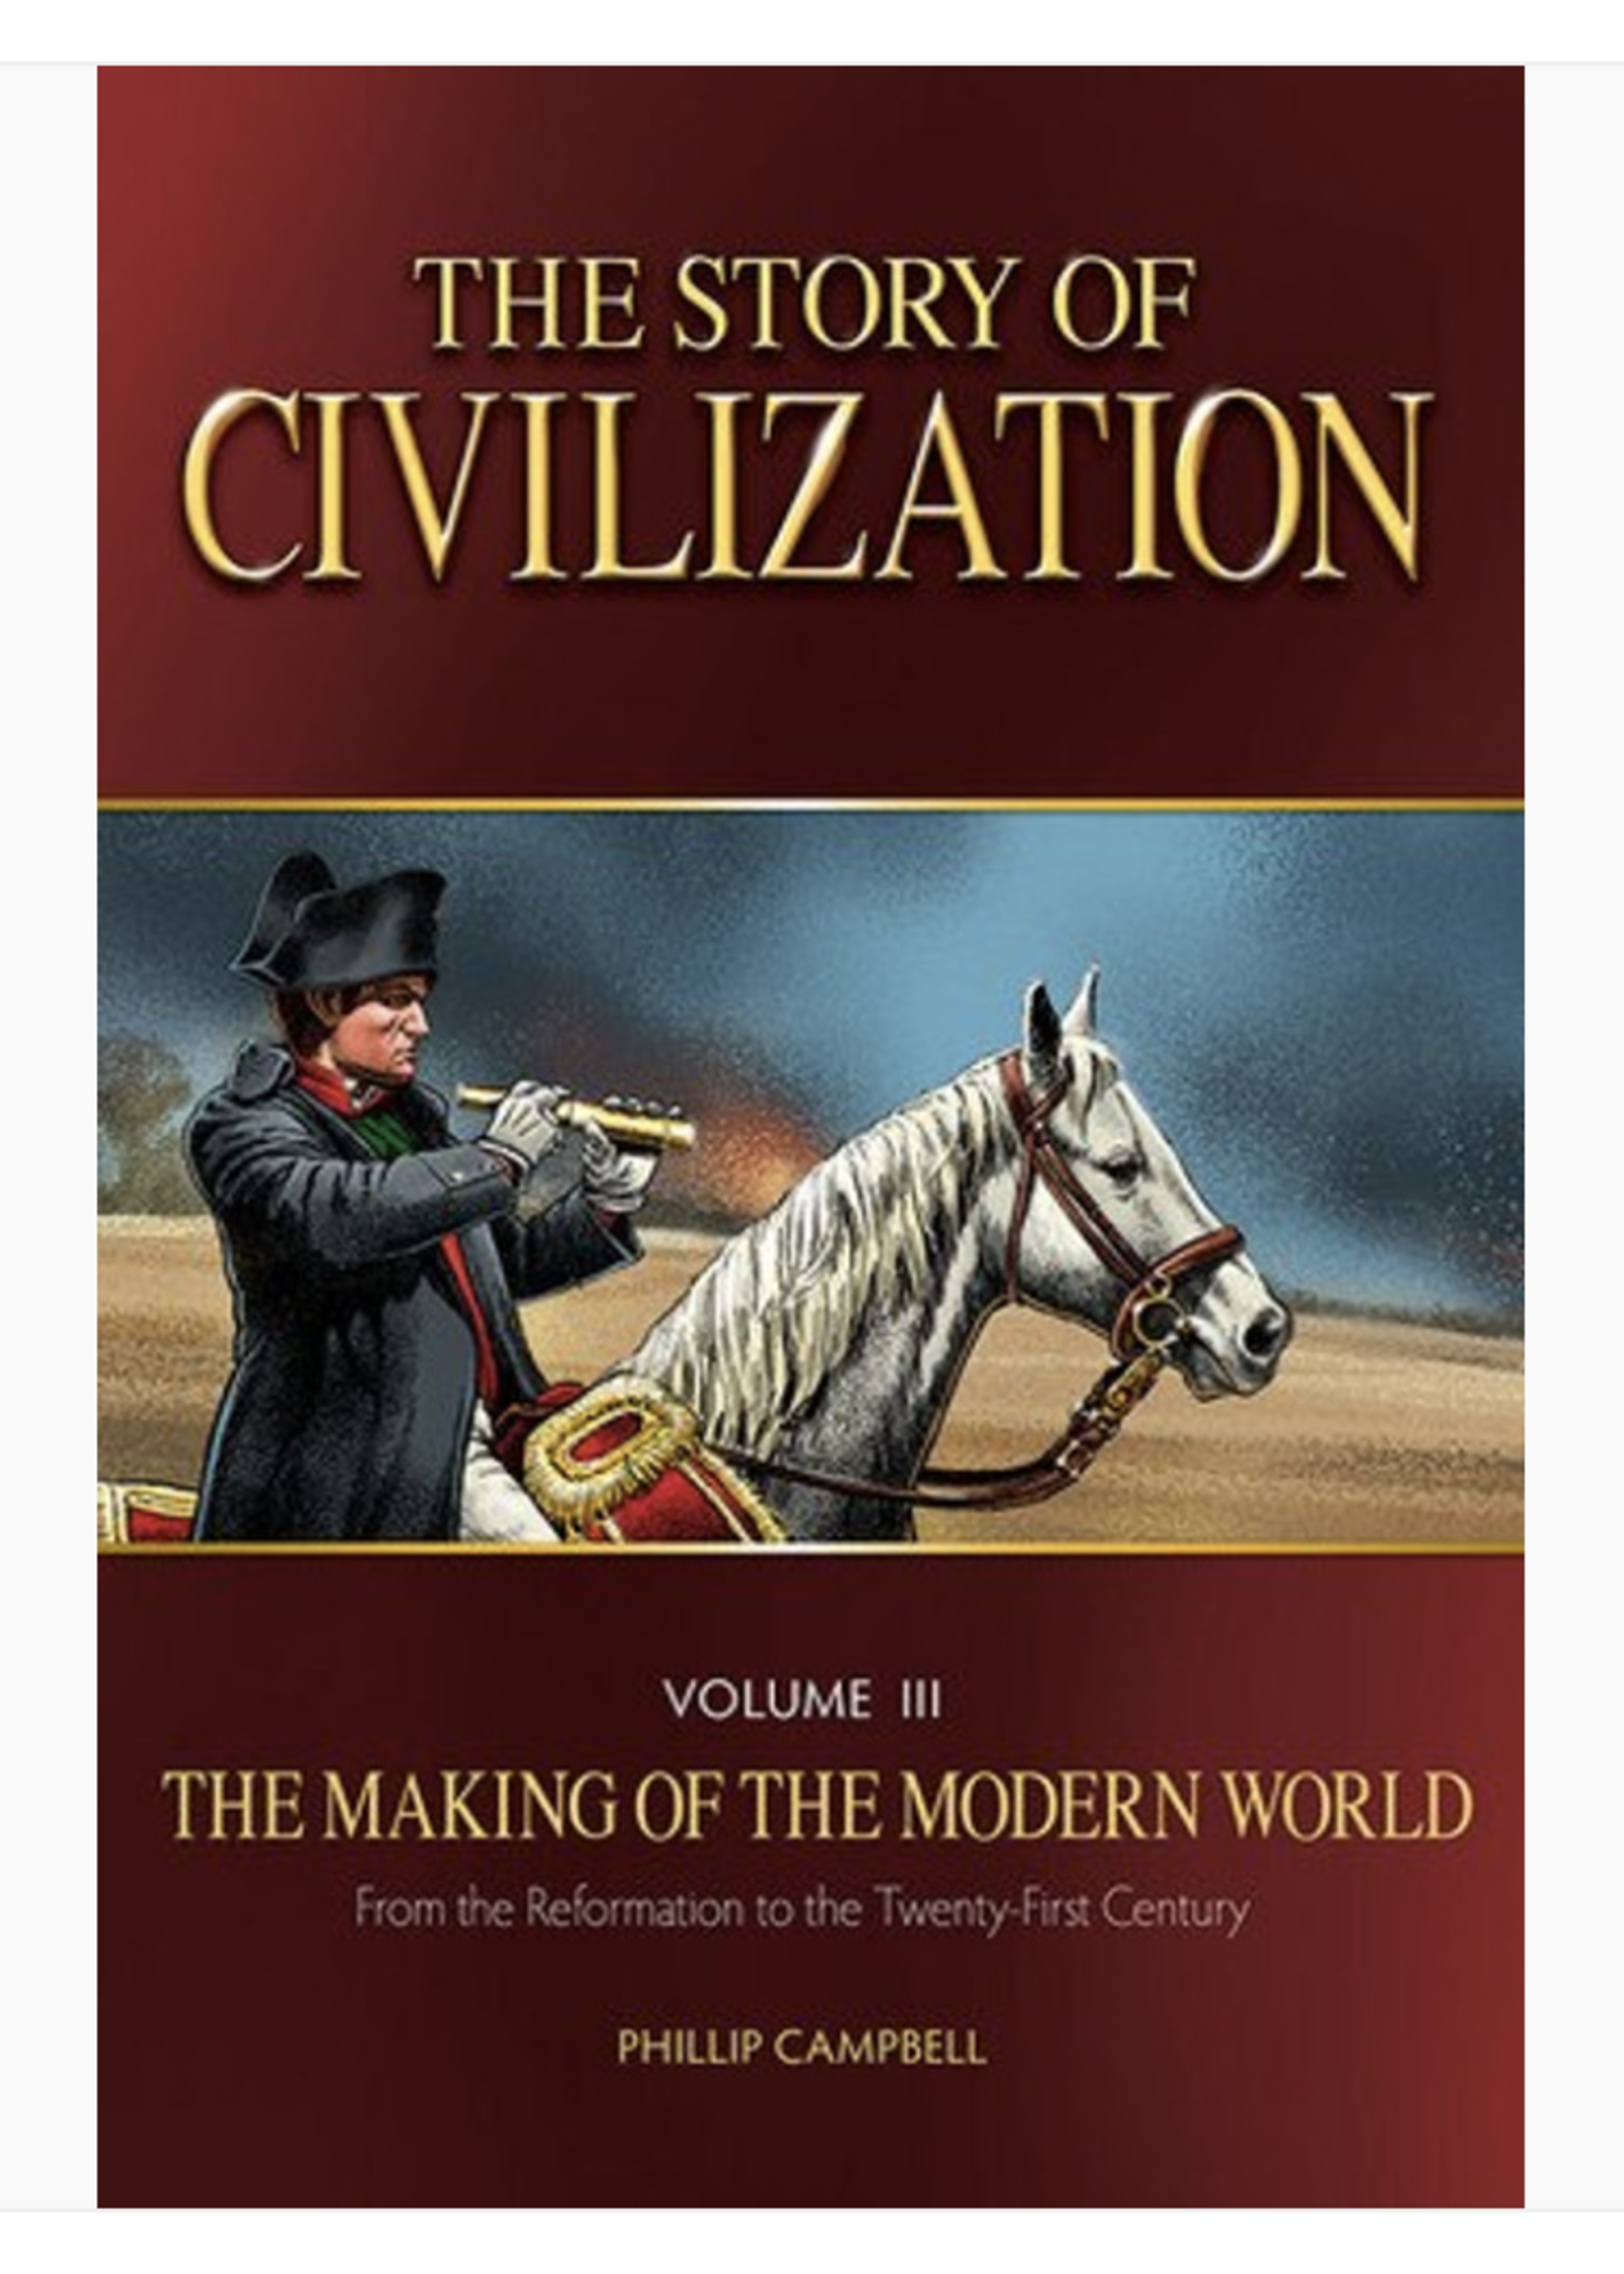 TAN Books The Story of Civilization Volume III: The Making of the Modern World